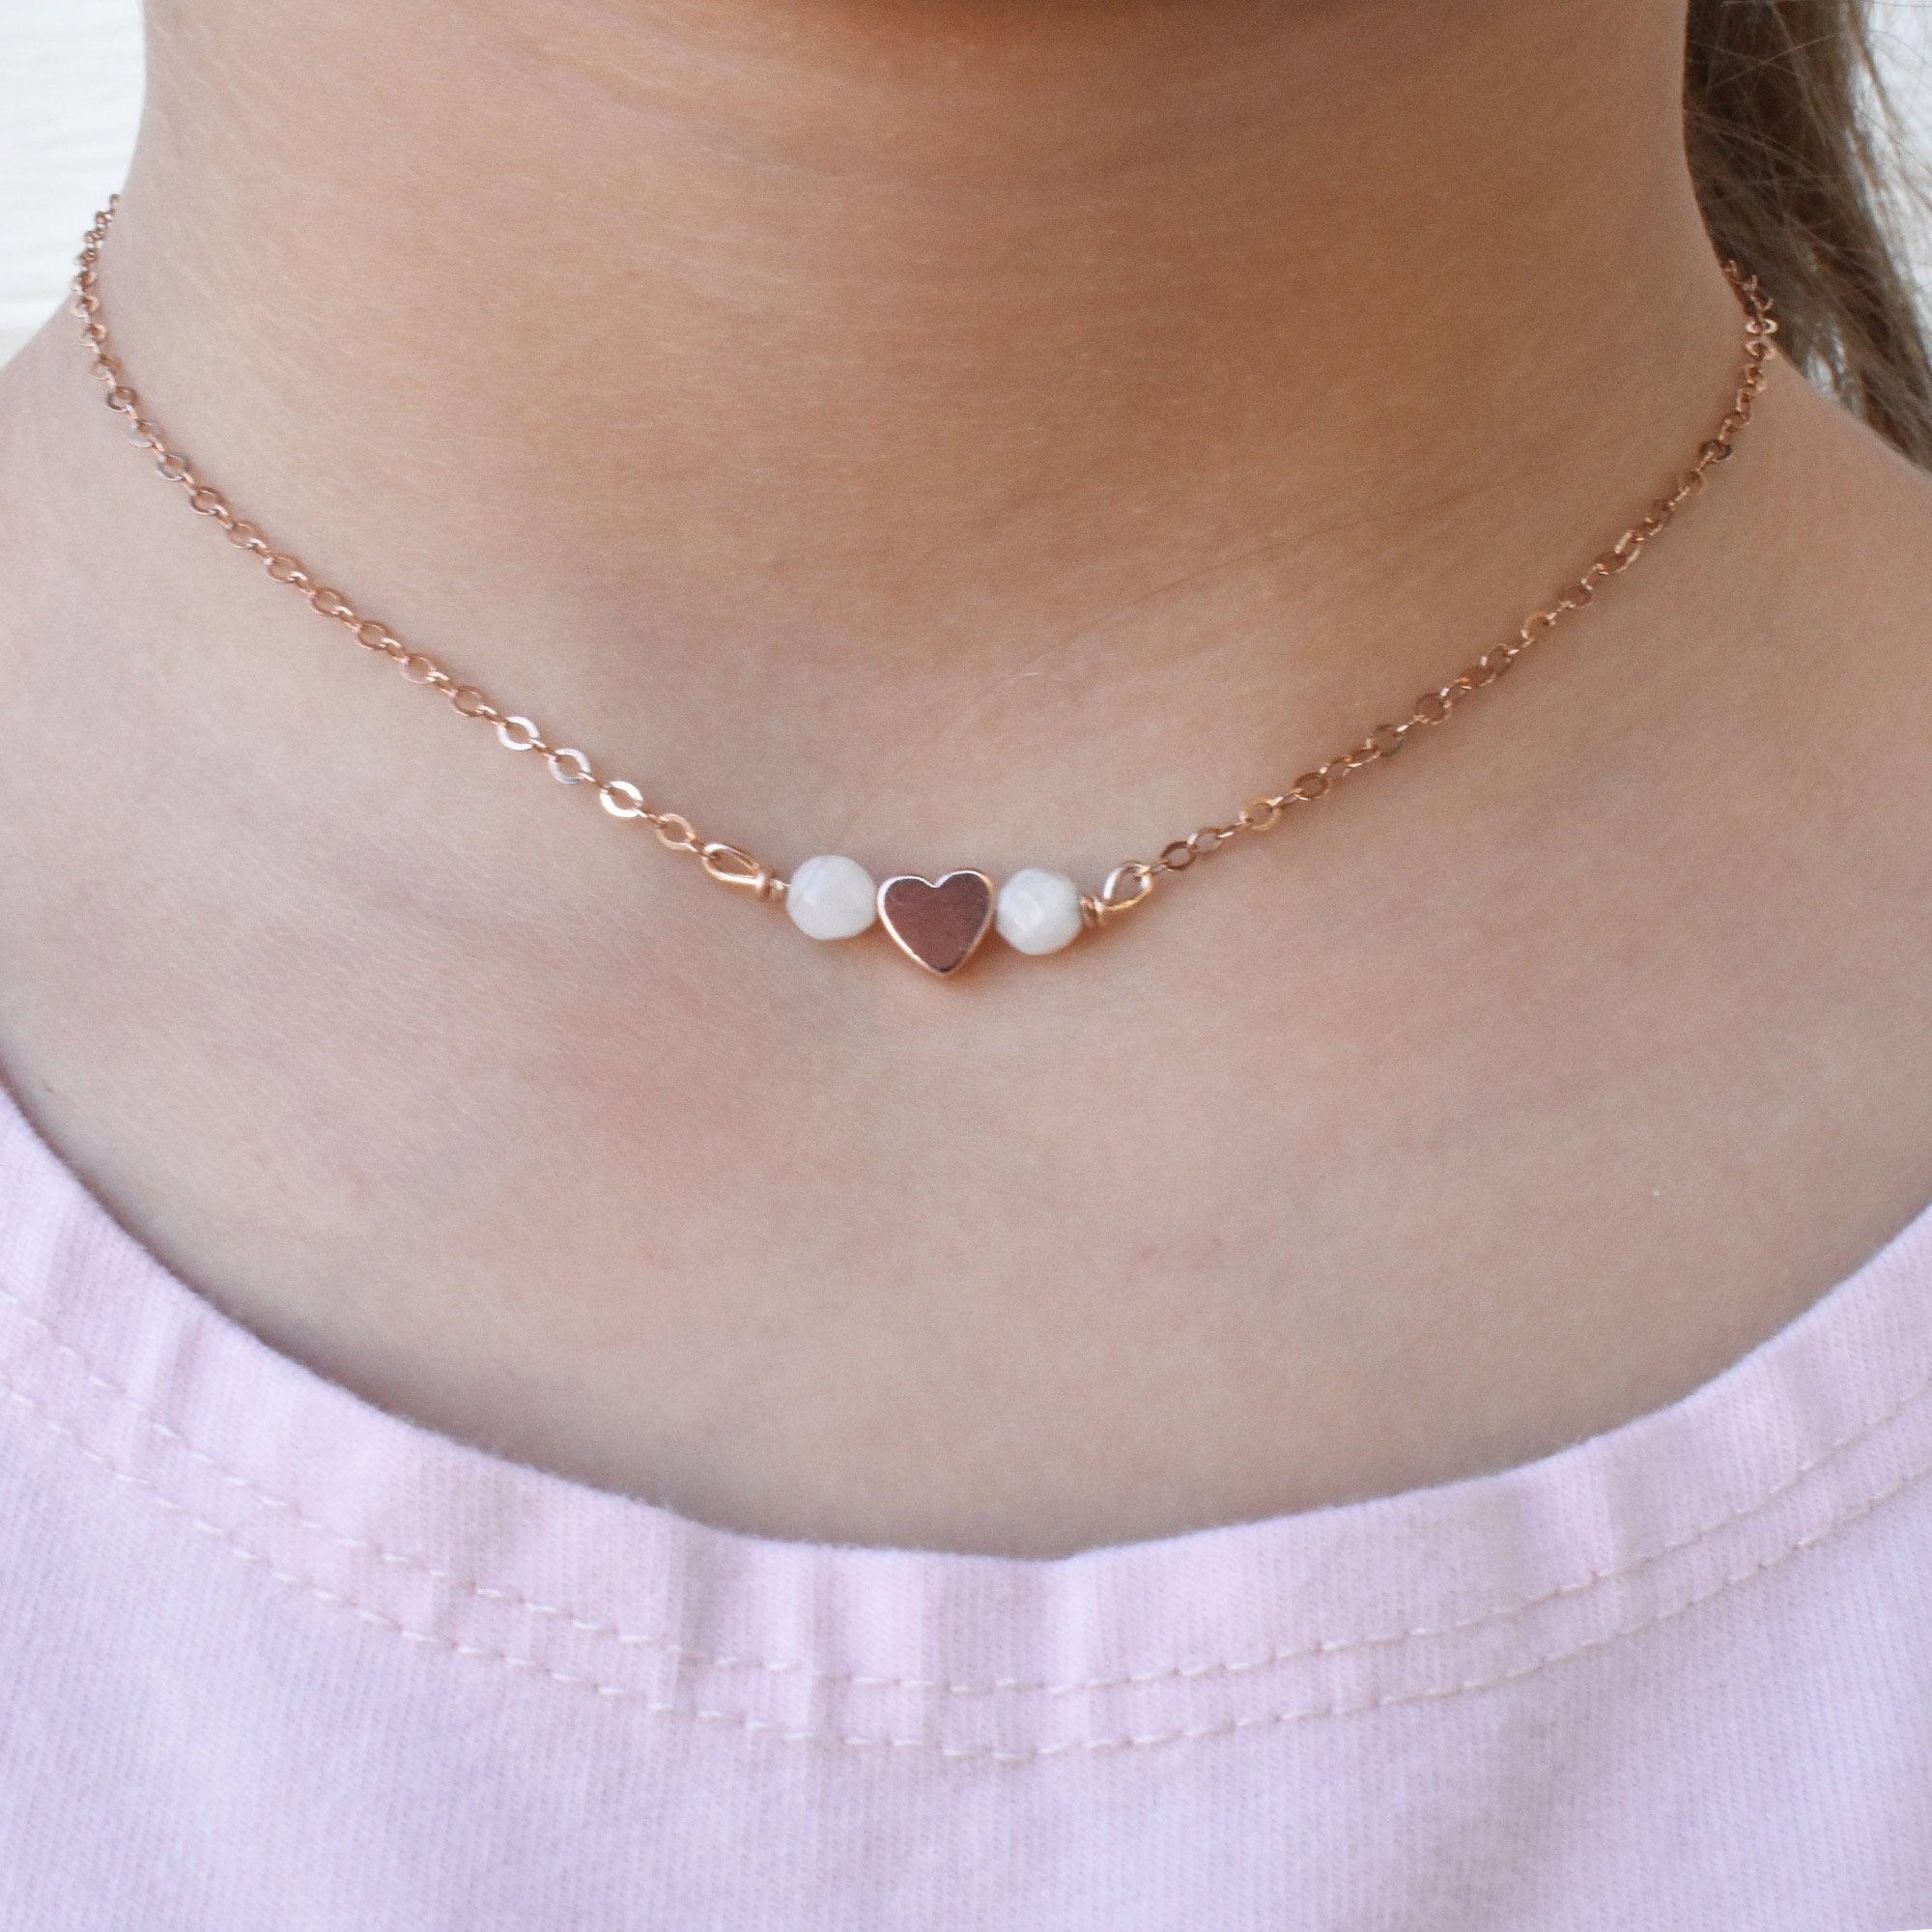 Girls rose gold heart necklace with healing gemstone opals. 